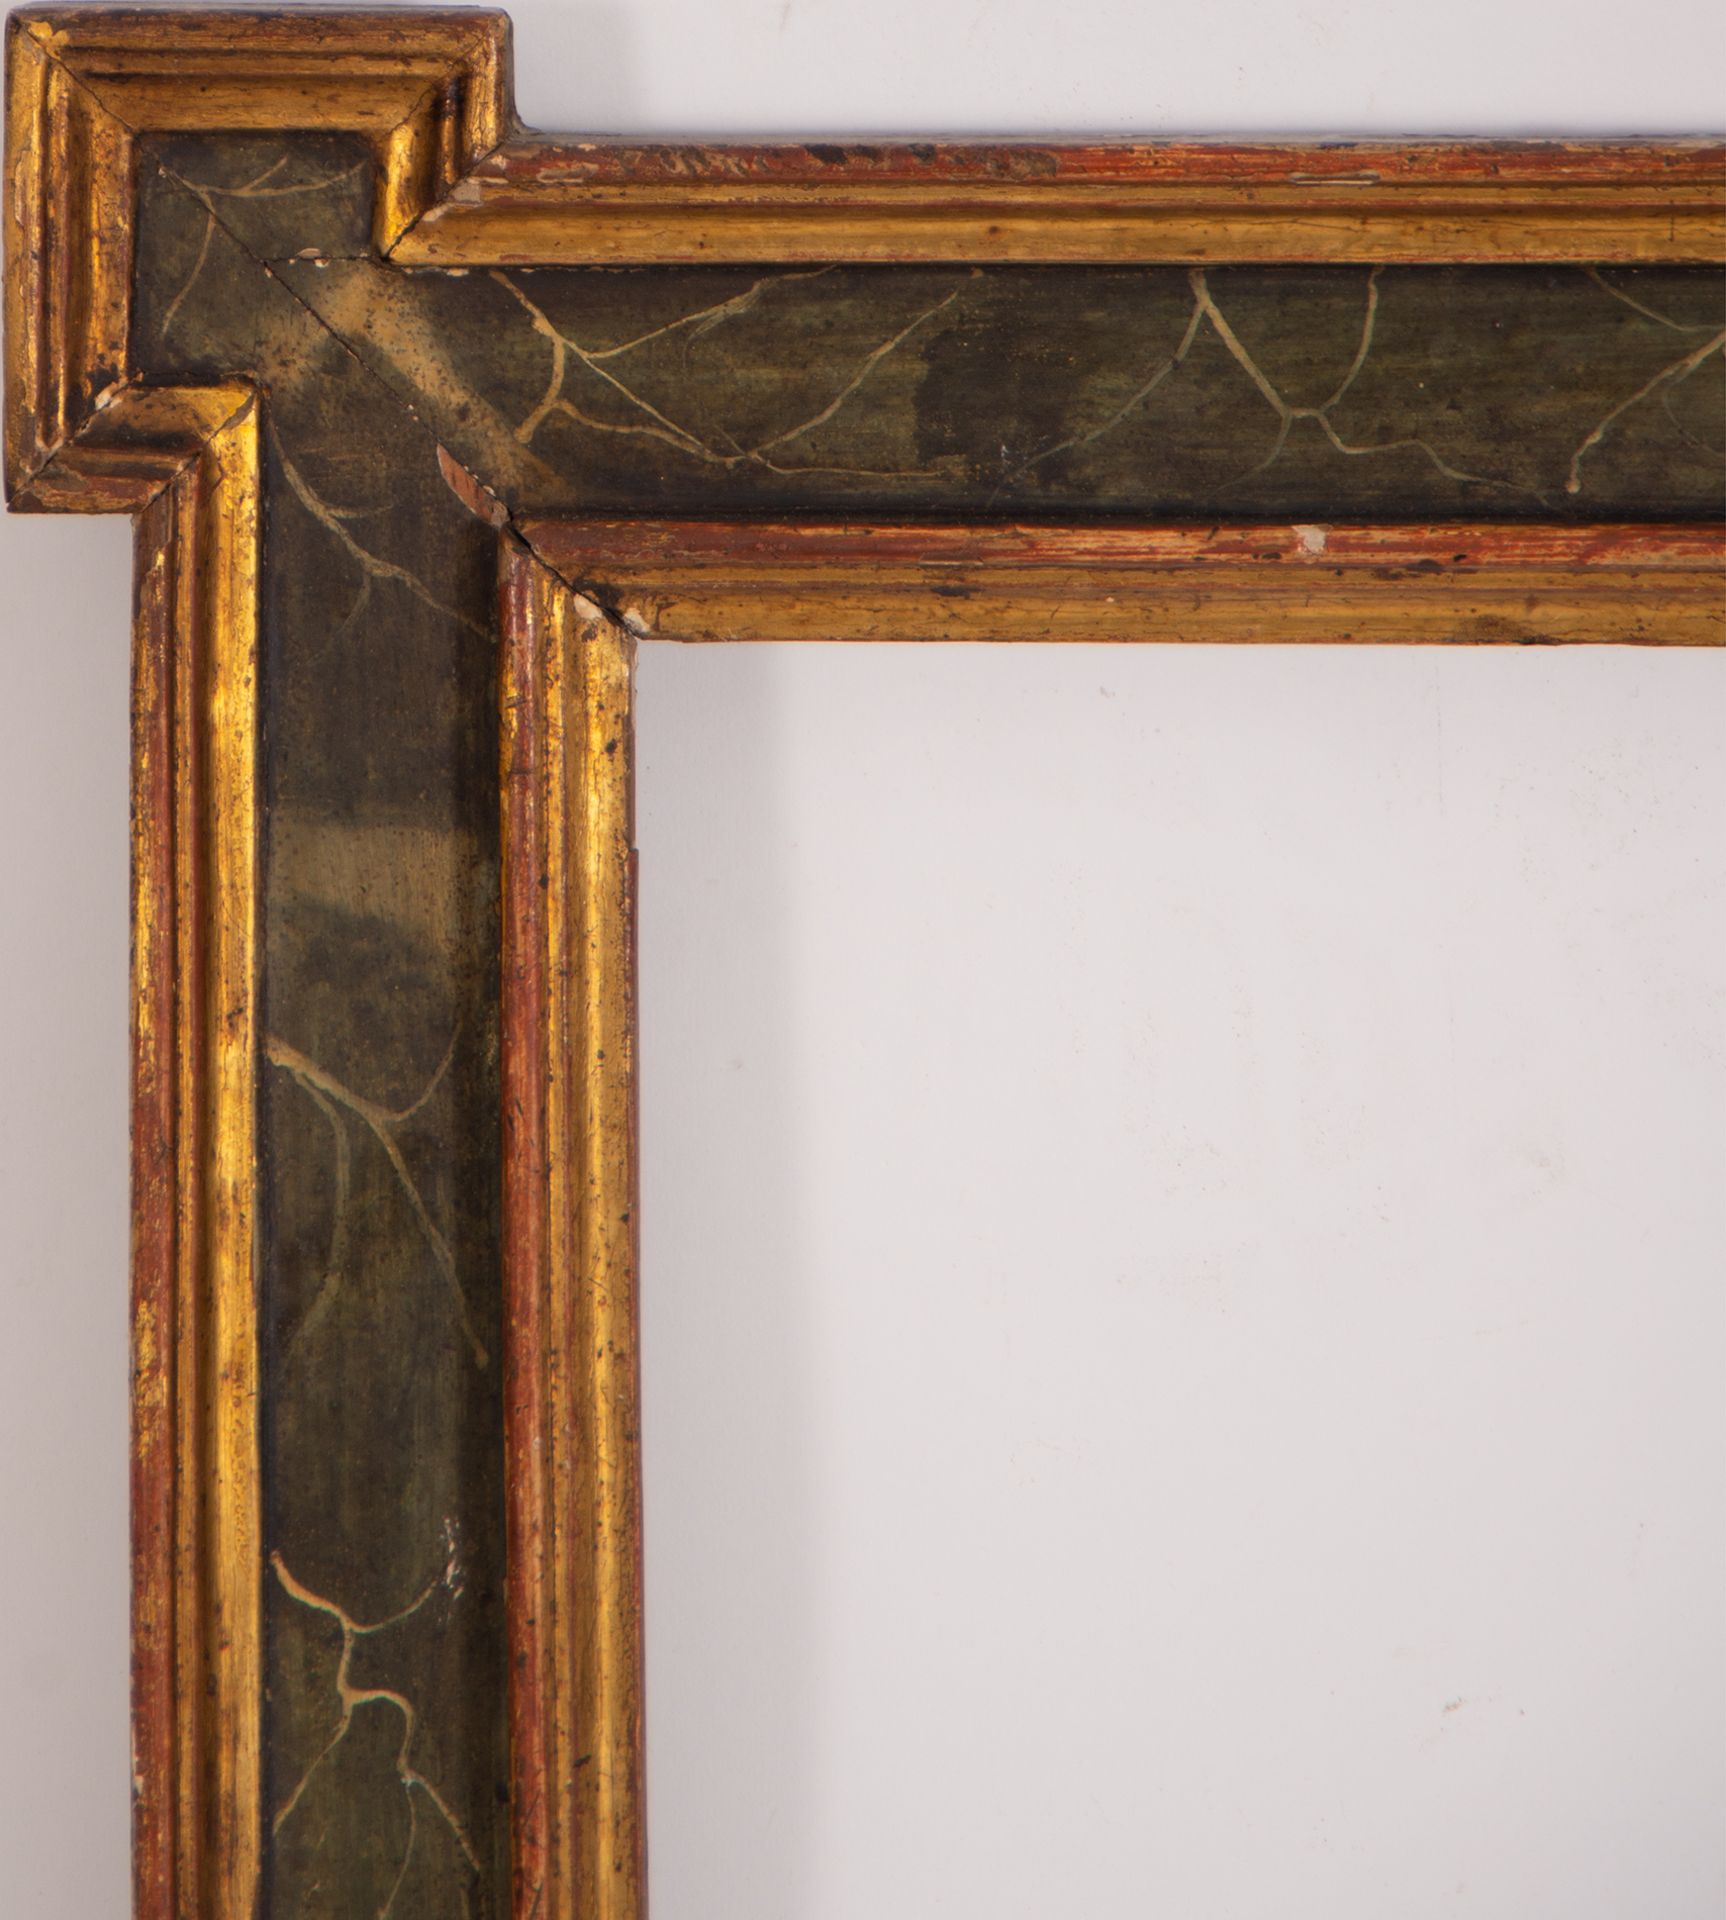 Rare Gilded and Marbled Frame, Italy, 18th century - Image 2 of 5